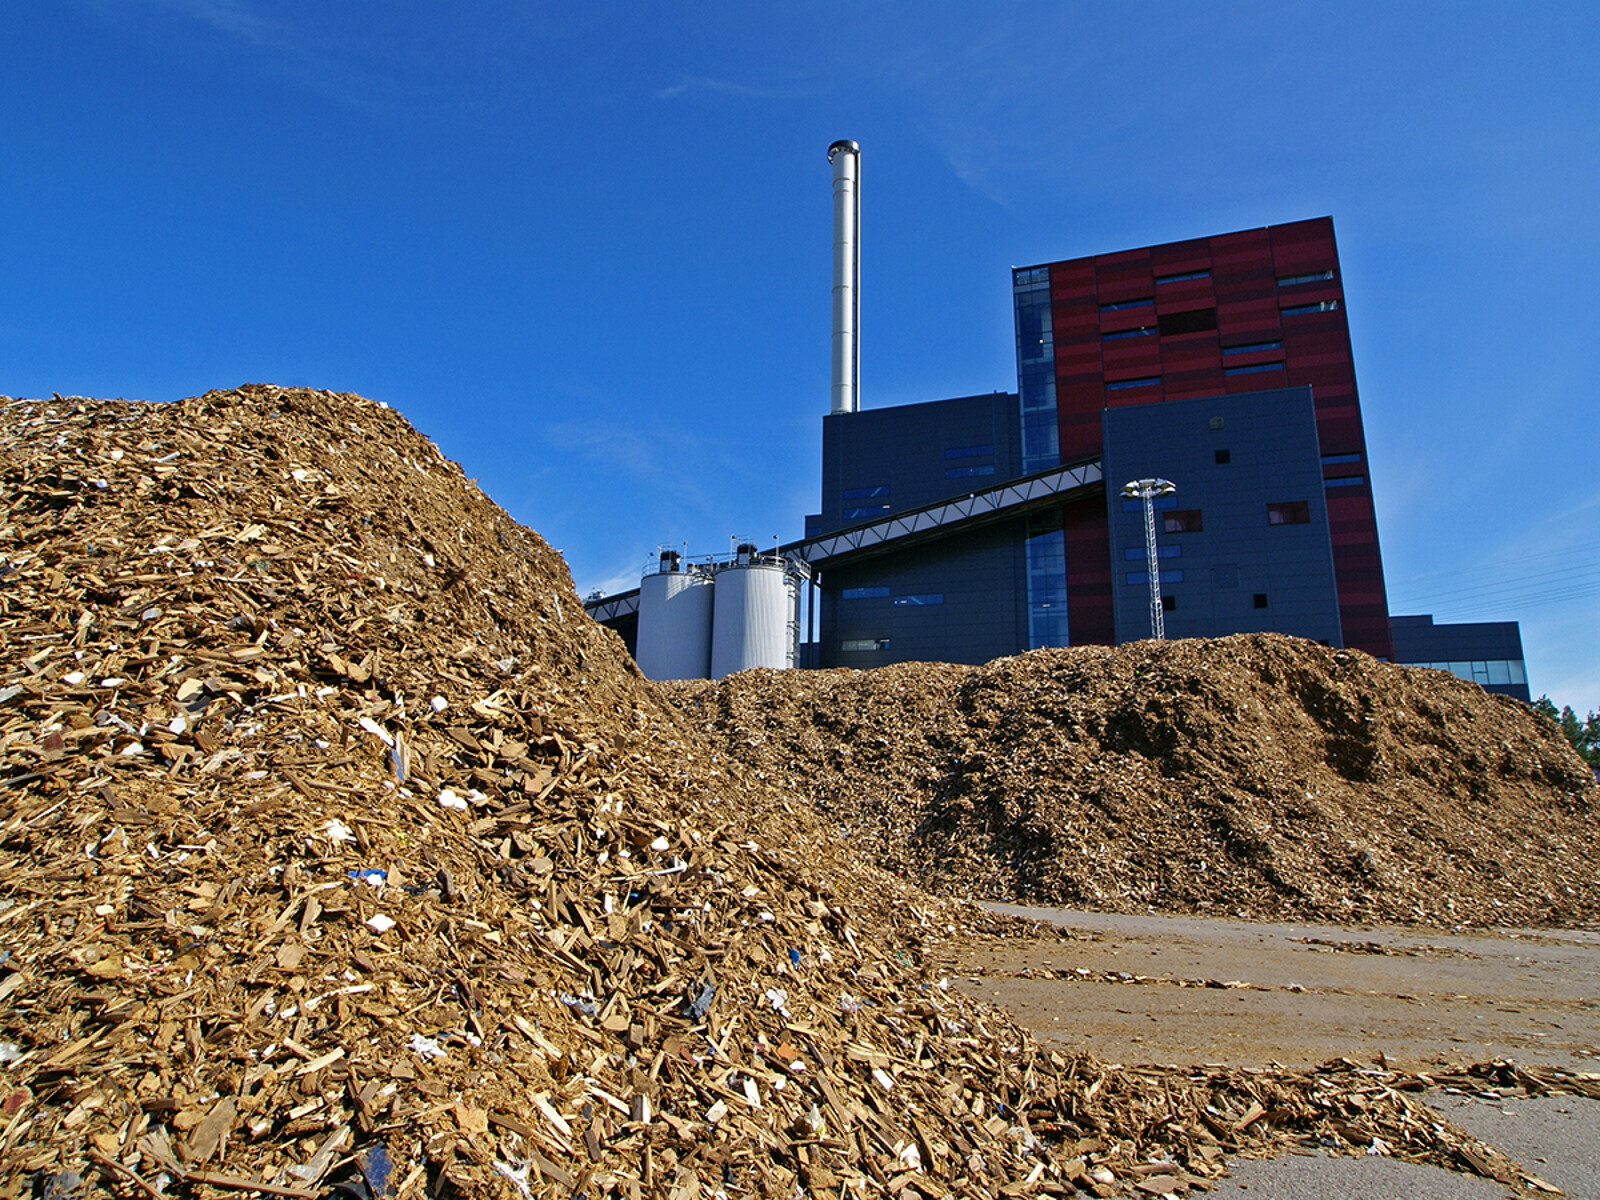 KSB offers high-quality pumps and valves for biomass power plants.